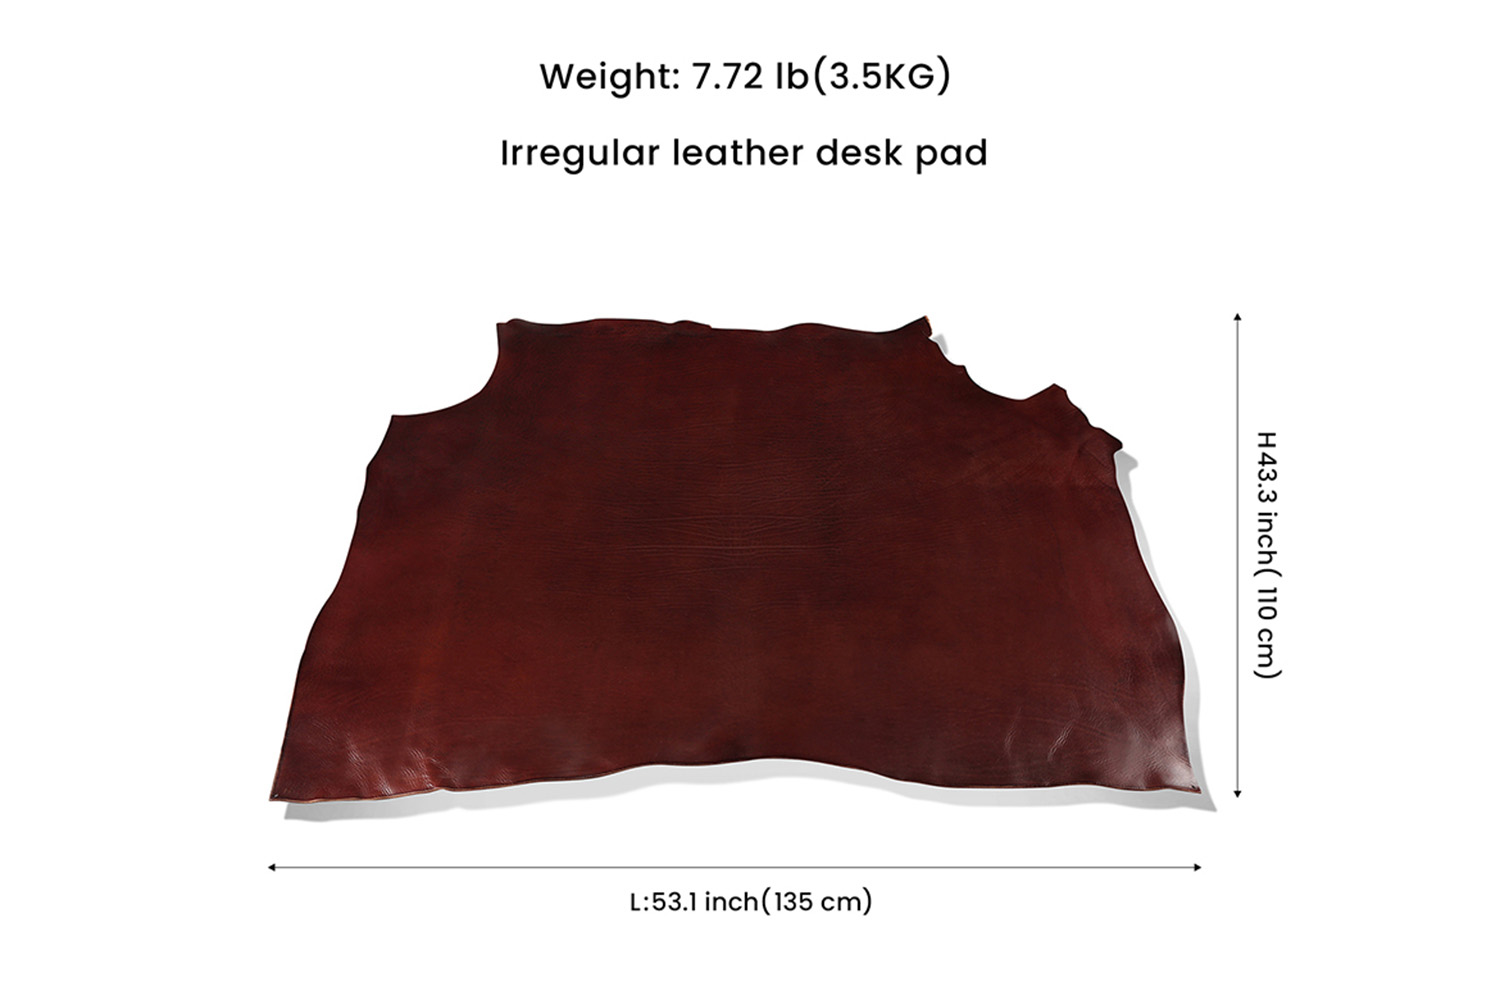 Genuine Leather Whole Leather Irregular Table Mat Mouse Pad (1)